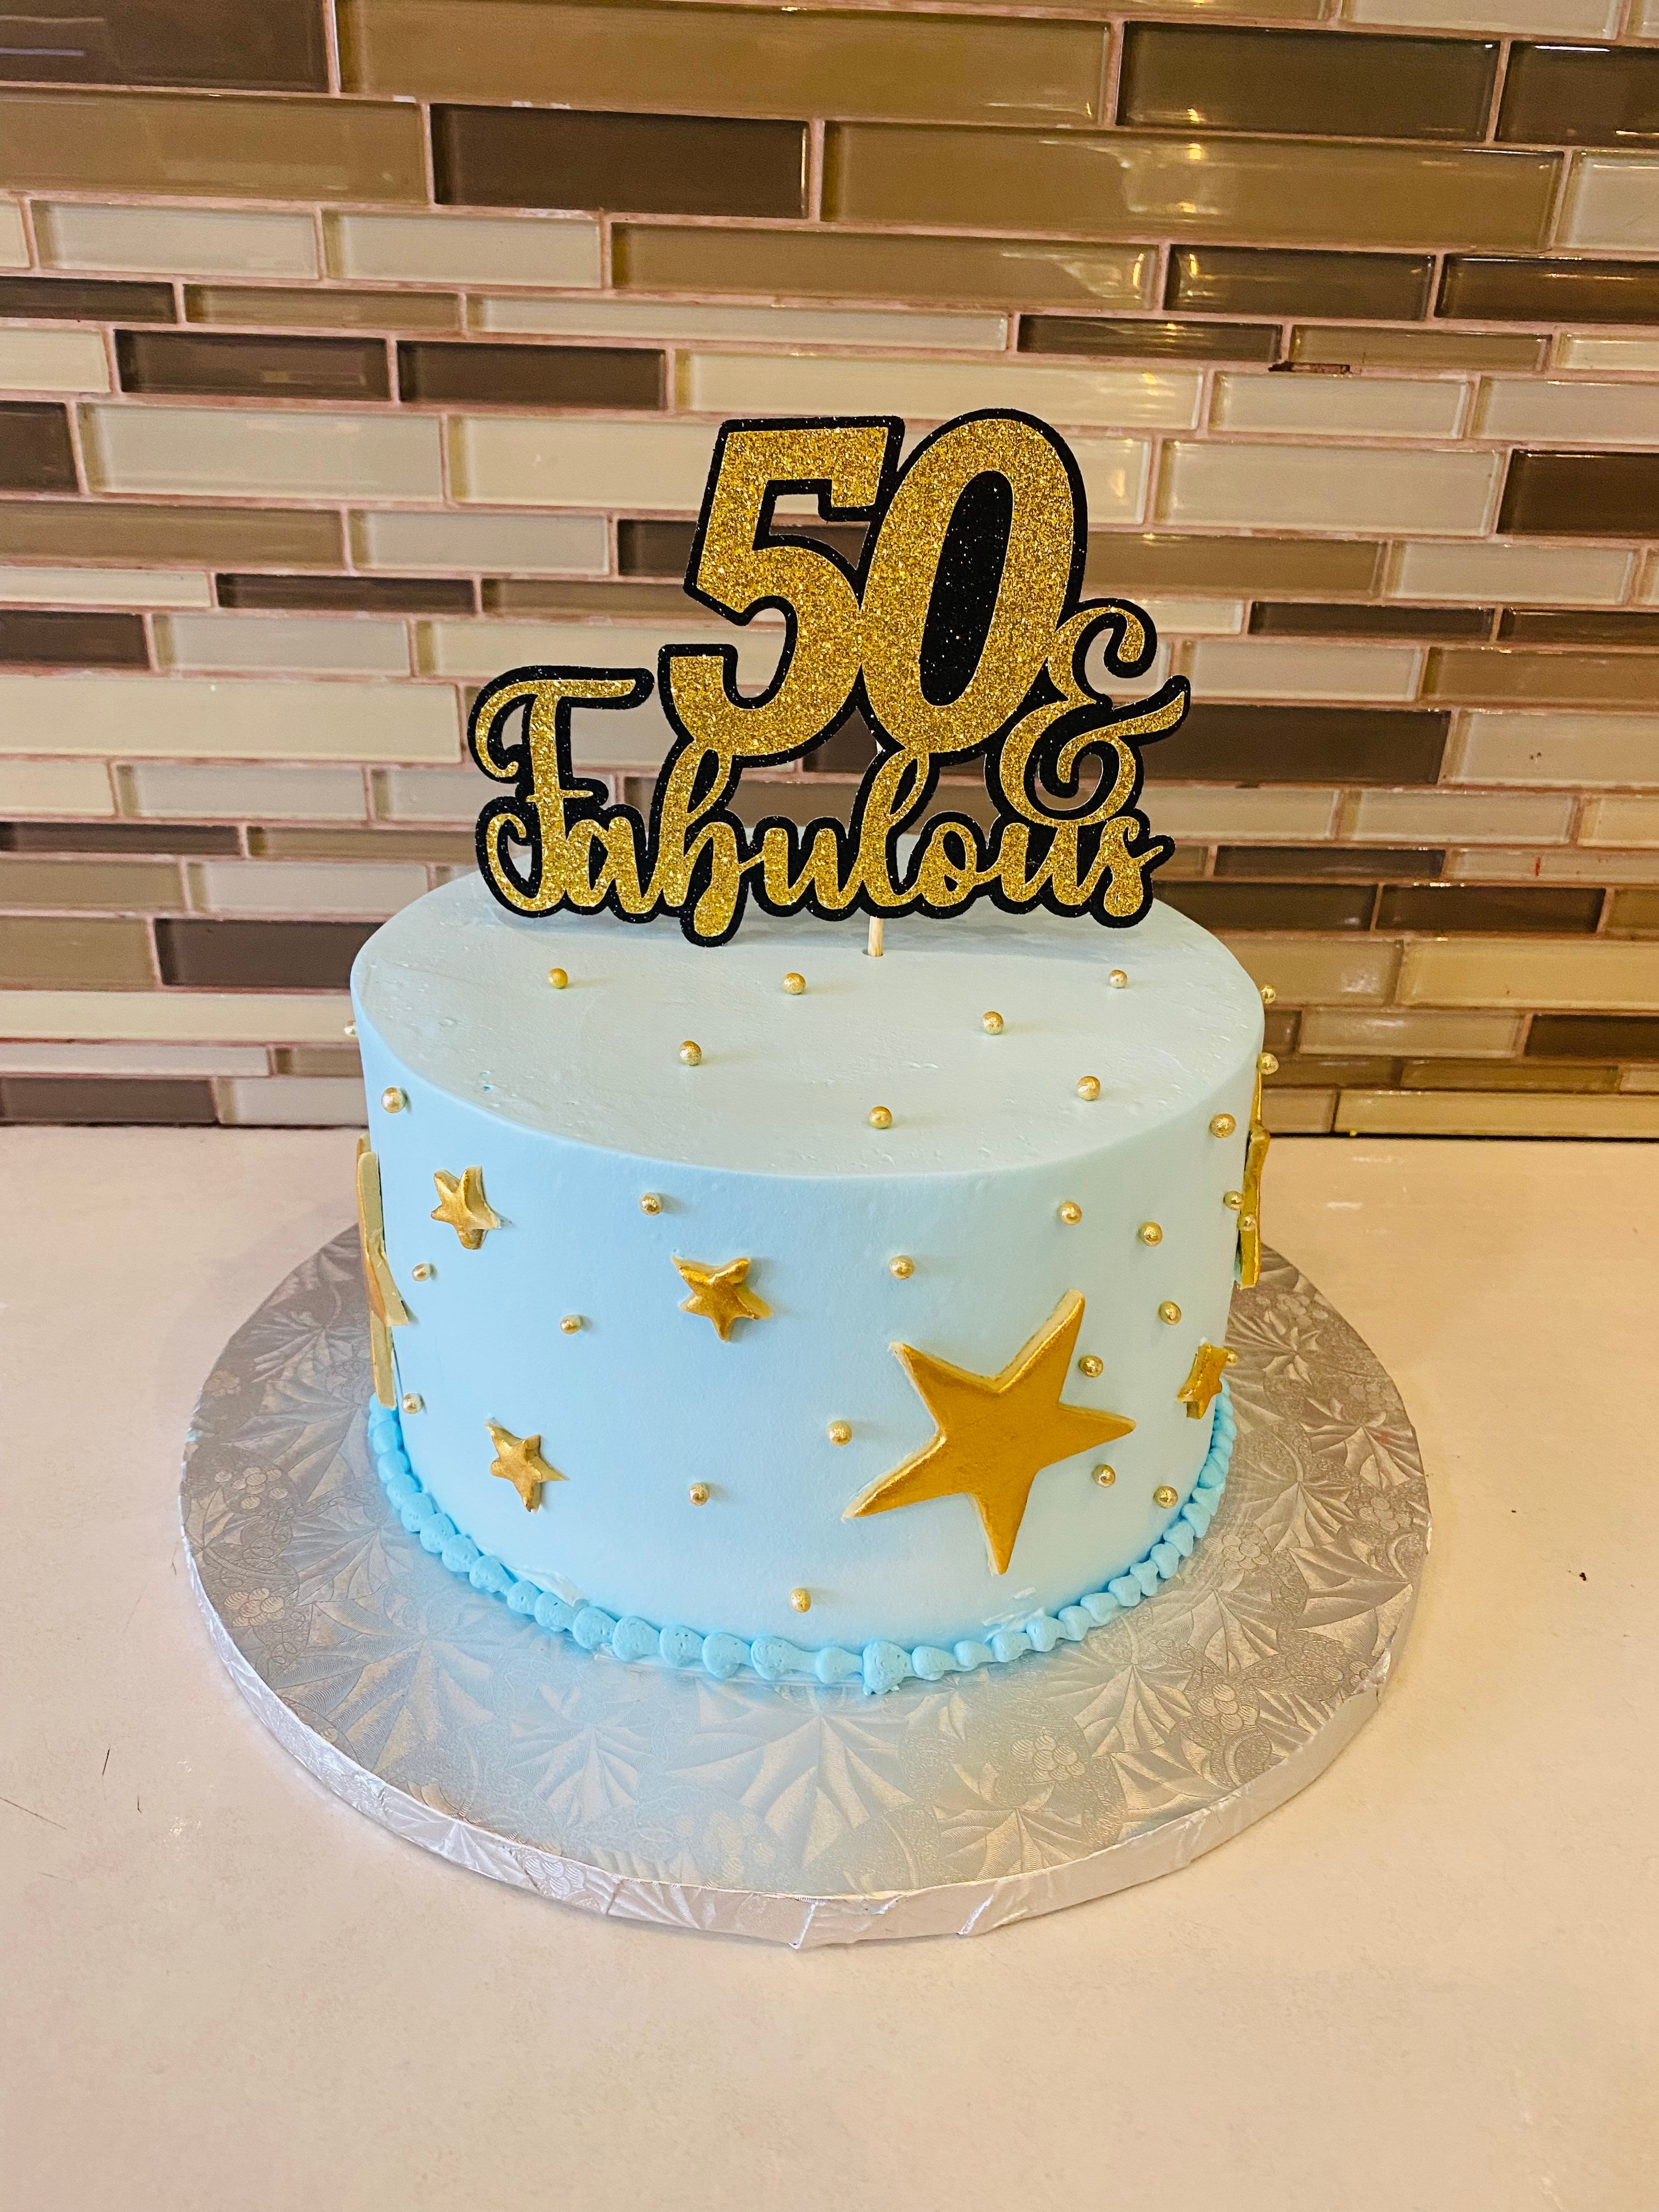 Photo of a gold white 50th anniversary cake - Patty's Cakes and Desserts